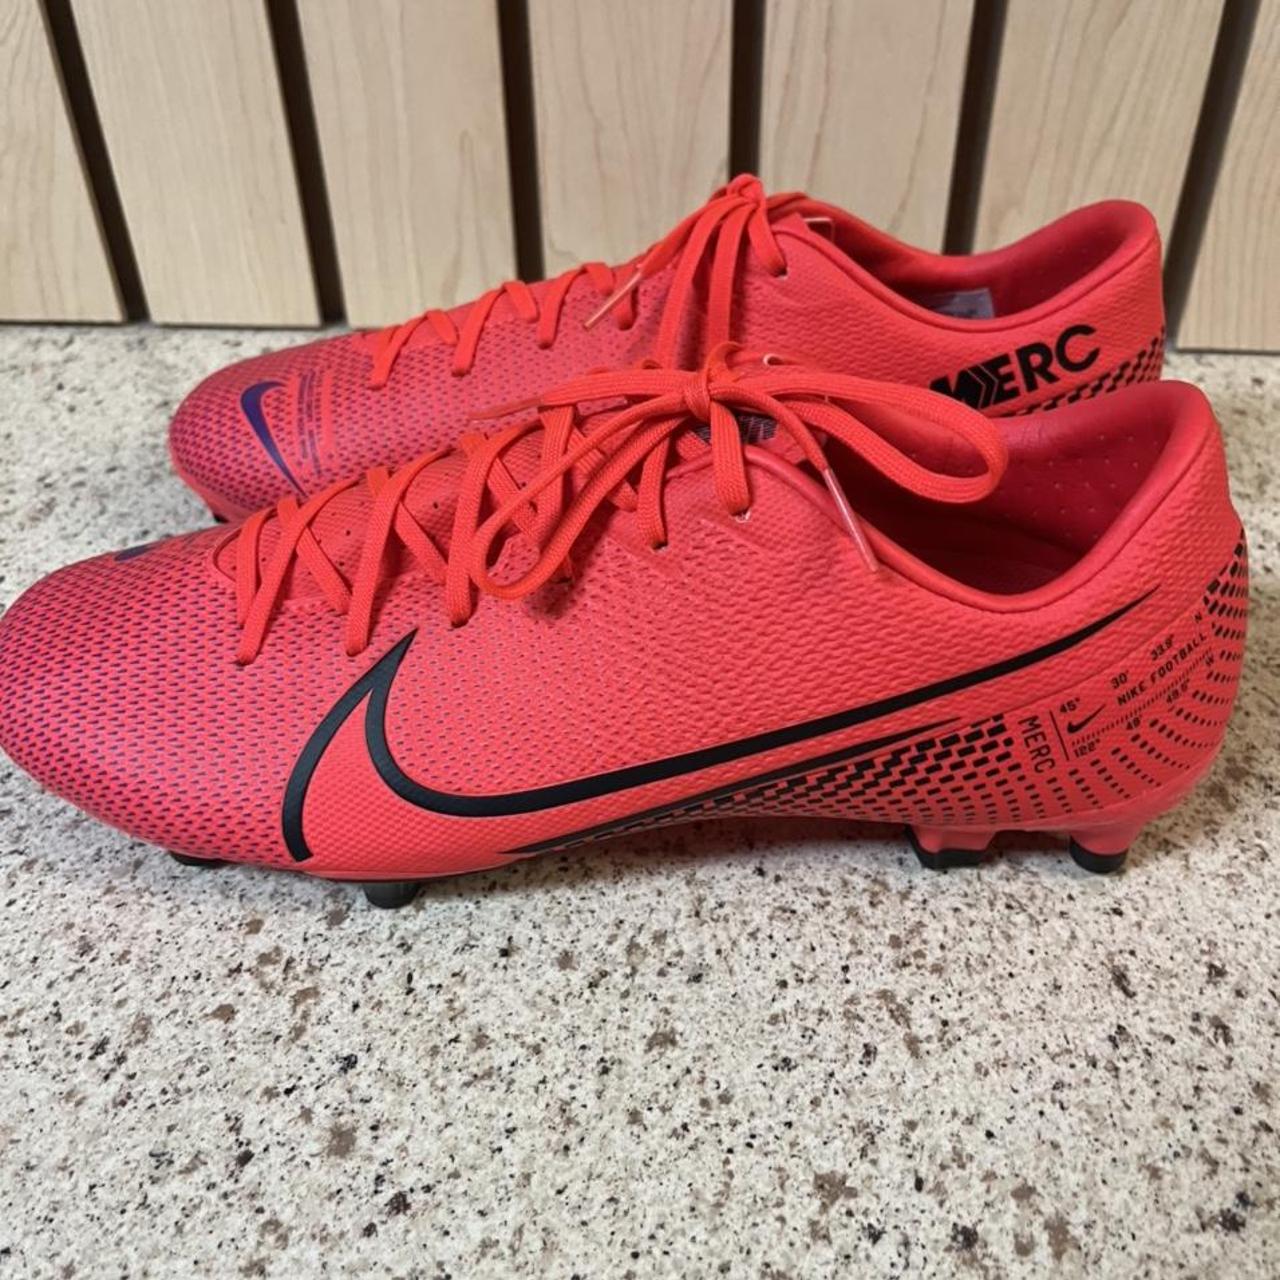 Product Image 3 - Nike Men's Football Boots, Red